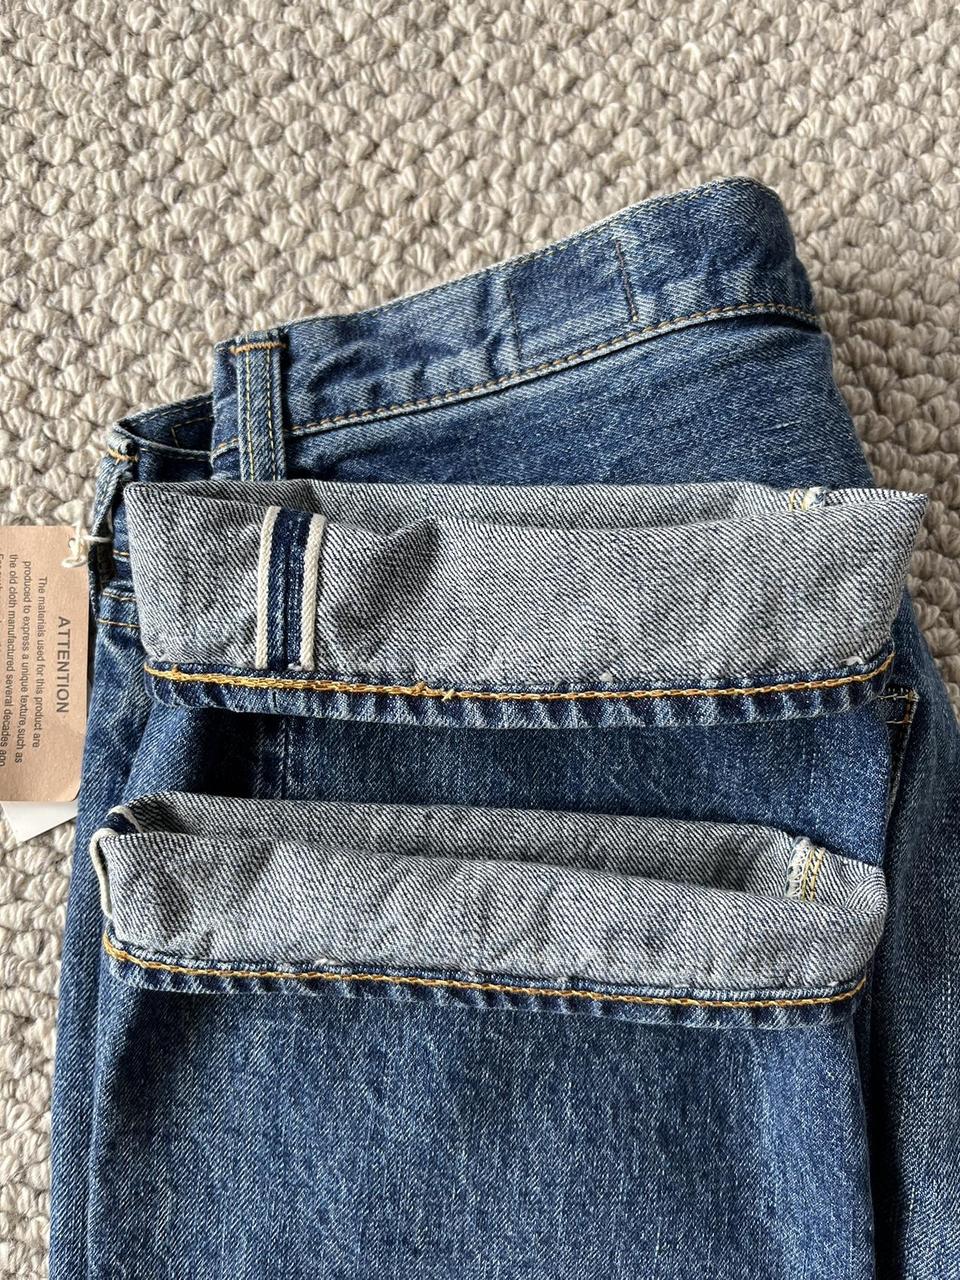 Orslow 105 jeans - BNWT Size 3, To fit a 32-34”... - Depop